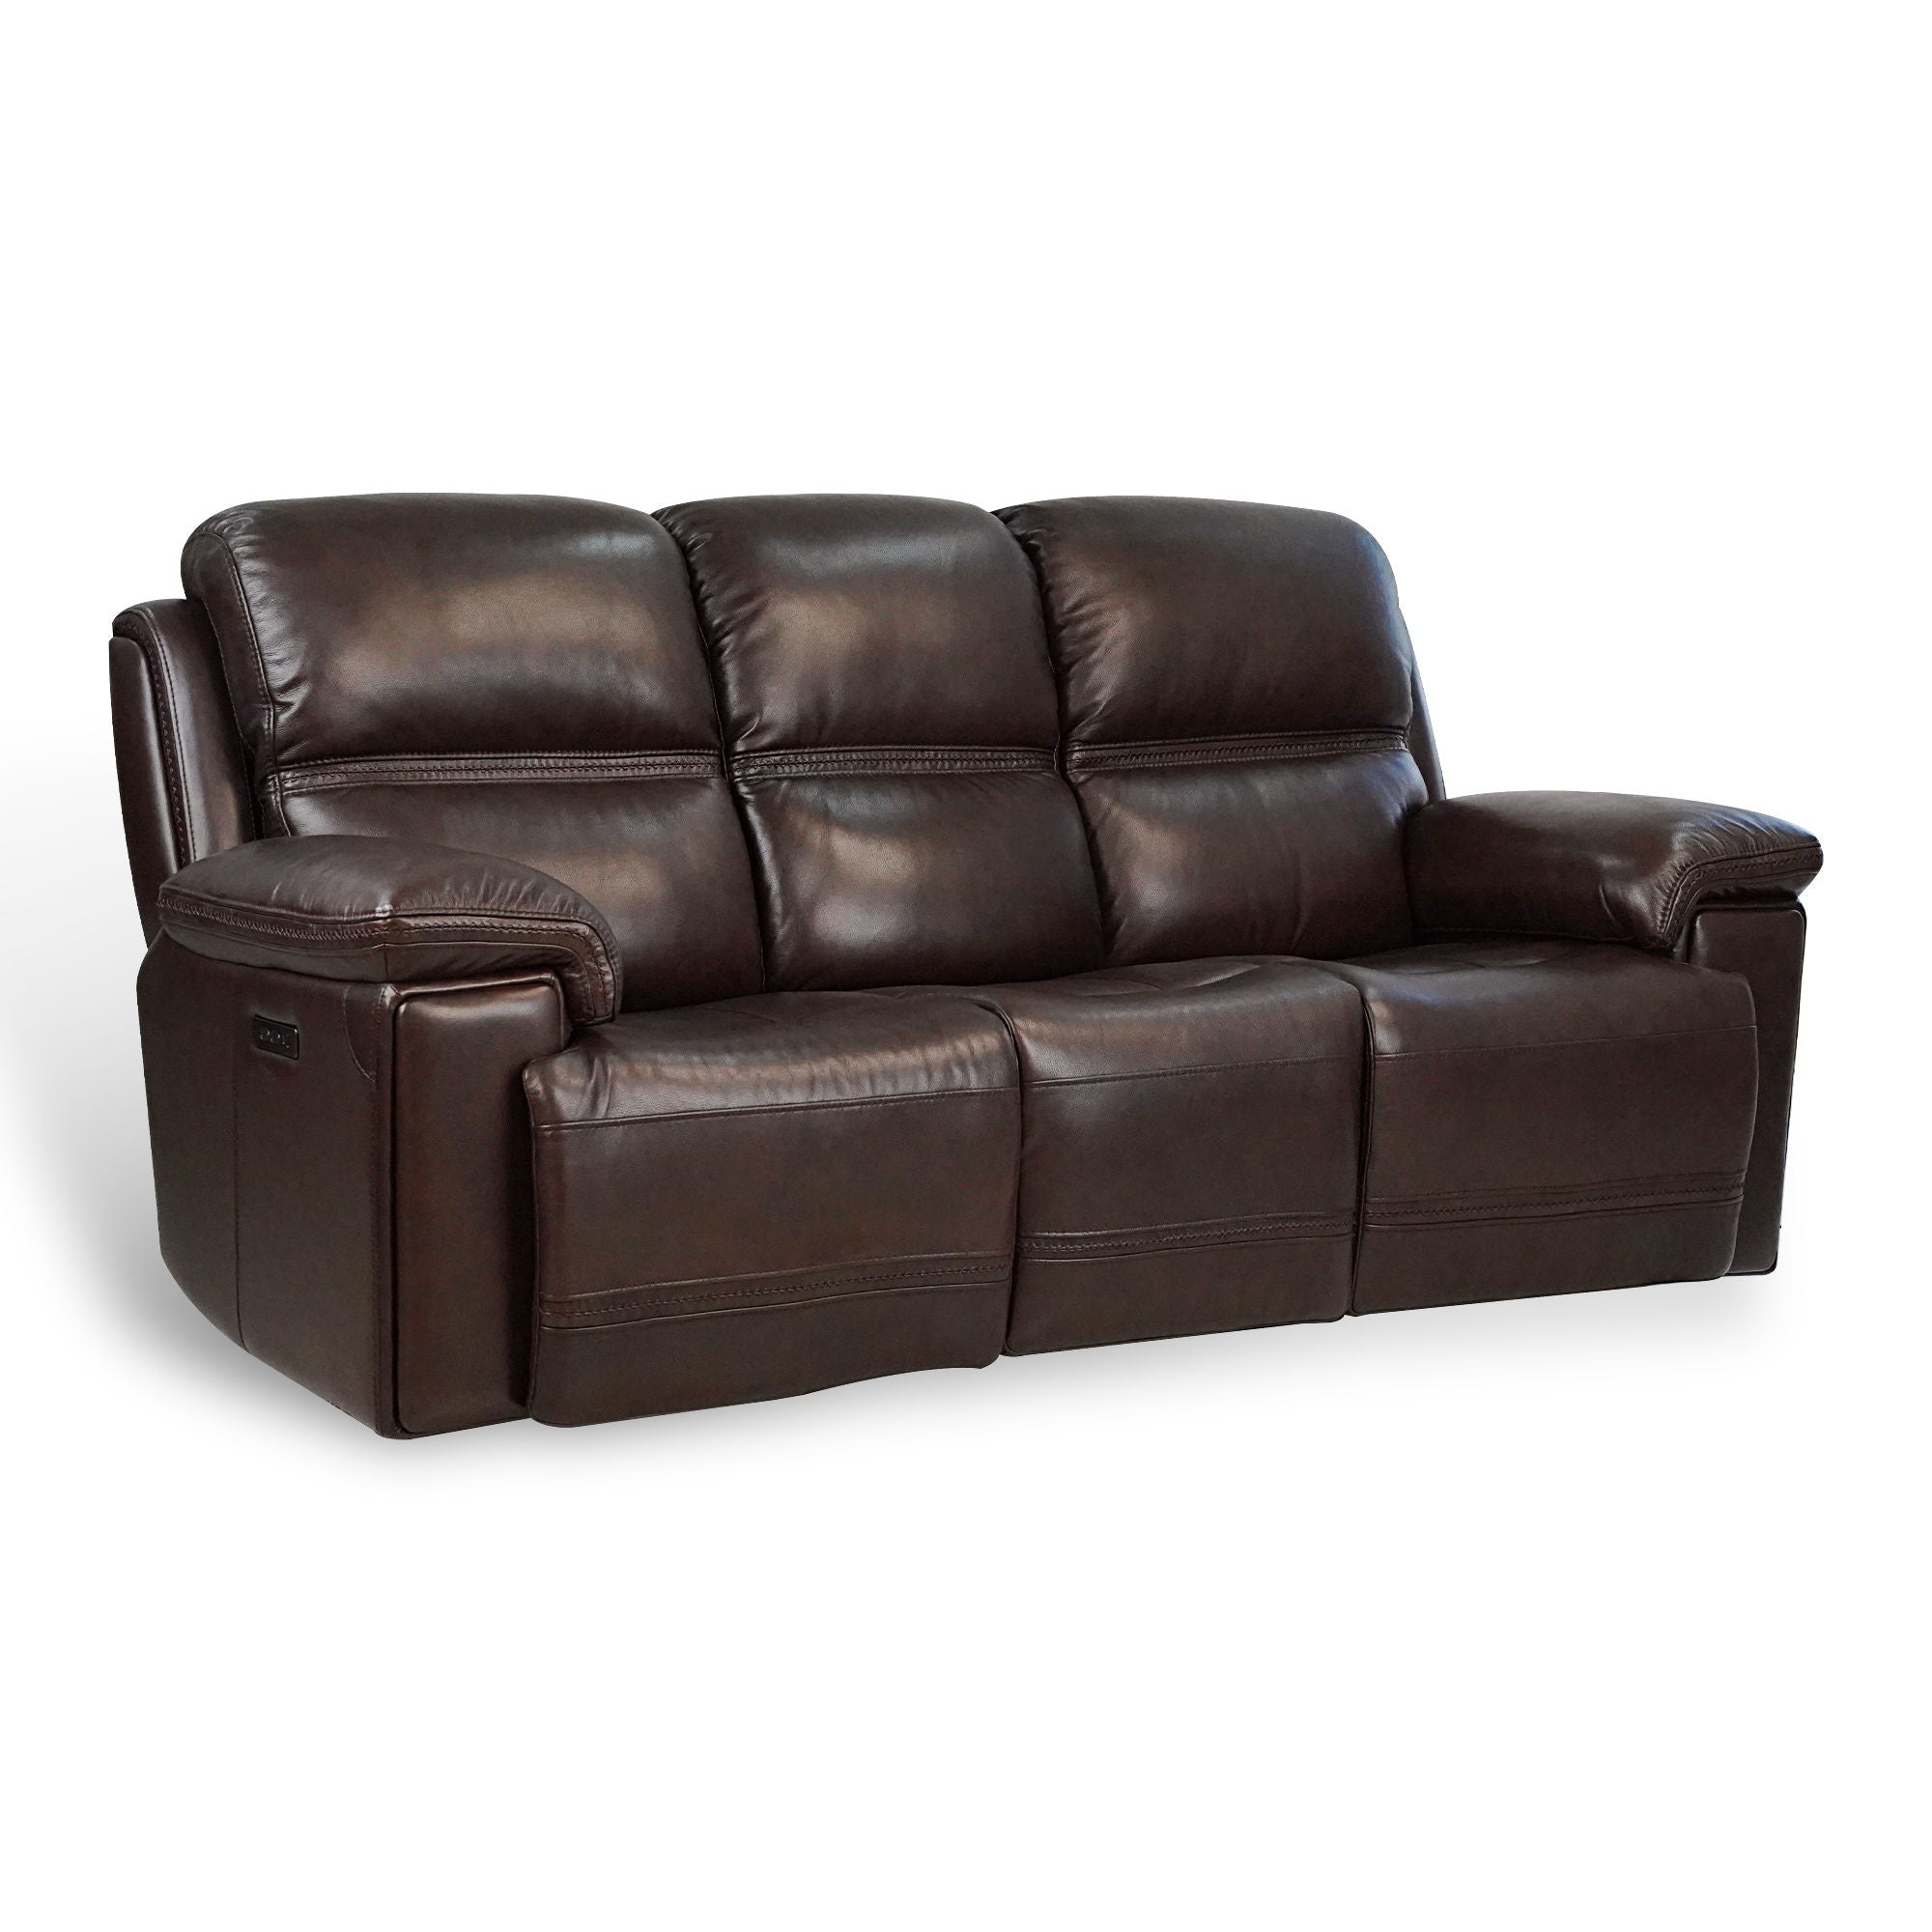 Timo Top Grain Leather Power Reclining Sofa, Adjustable Headrest, Cross Stitching